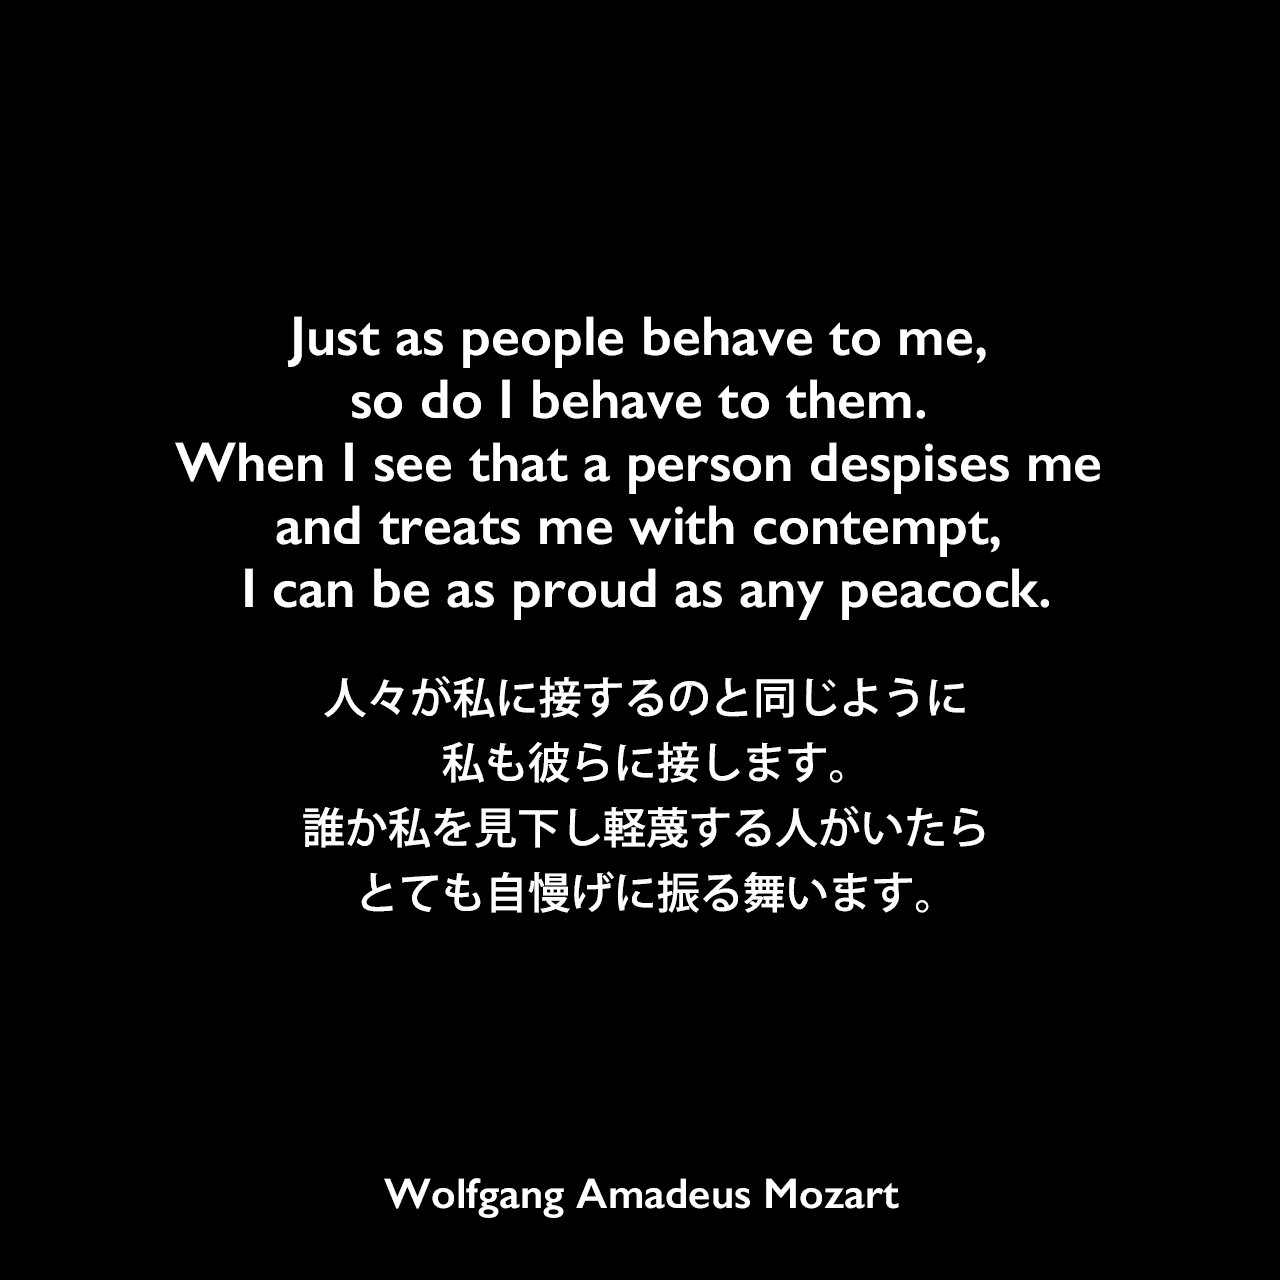 Just as people behave to me, so do I behave to them. When I see that a person despises me and treats me with contempt, I can be as proud as any peacock.人々が私に接するのと同じように私も彼らに接します。誰か私を見下し軽蔑する人がいたらとても自慢げに振る舞います。Wolfgang Amadeus Mozart